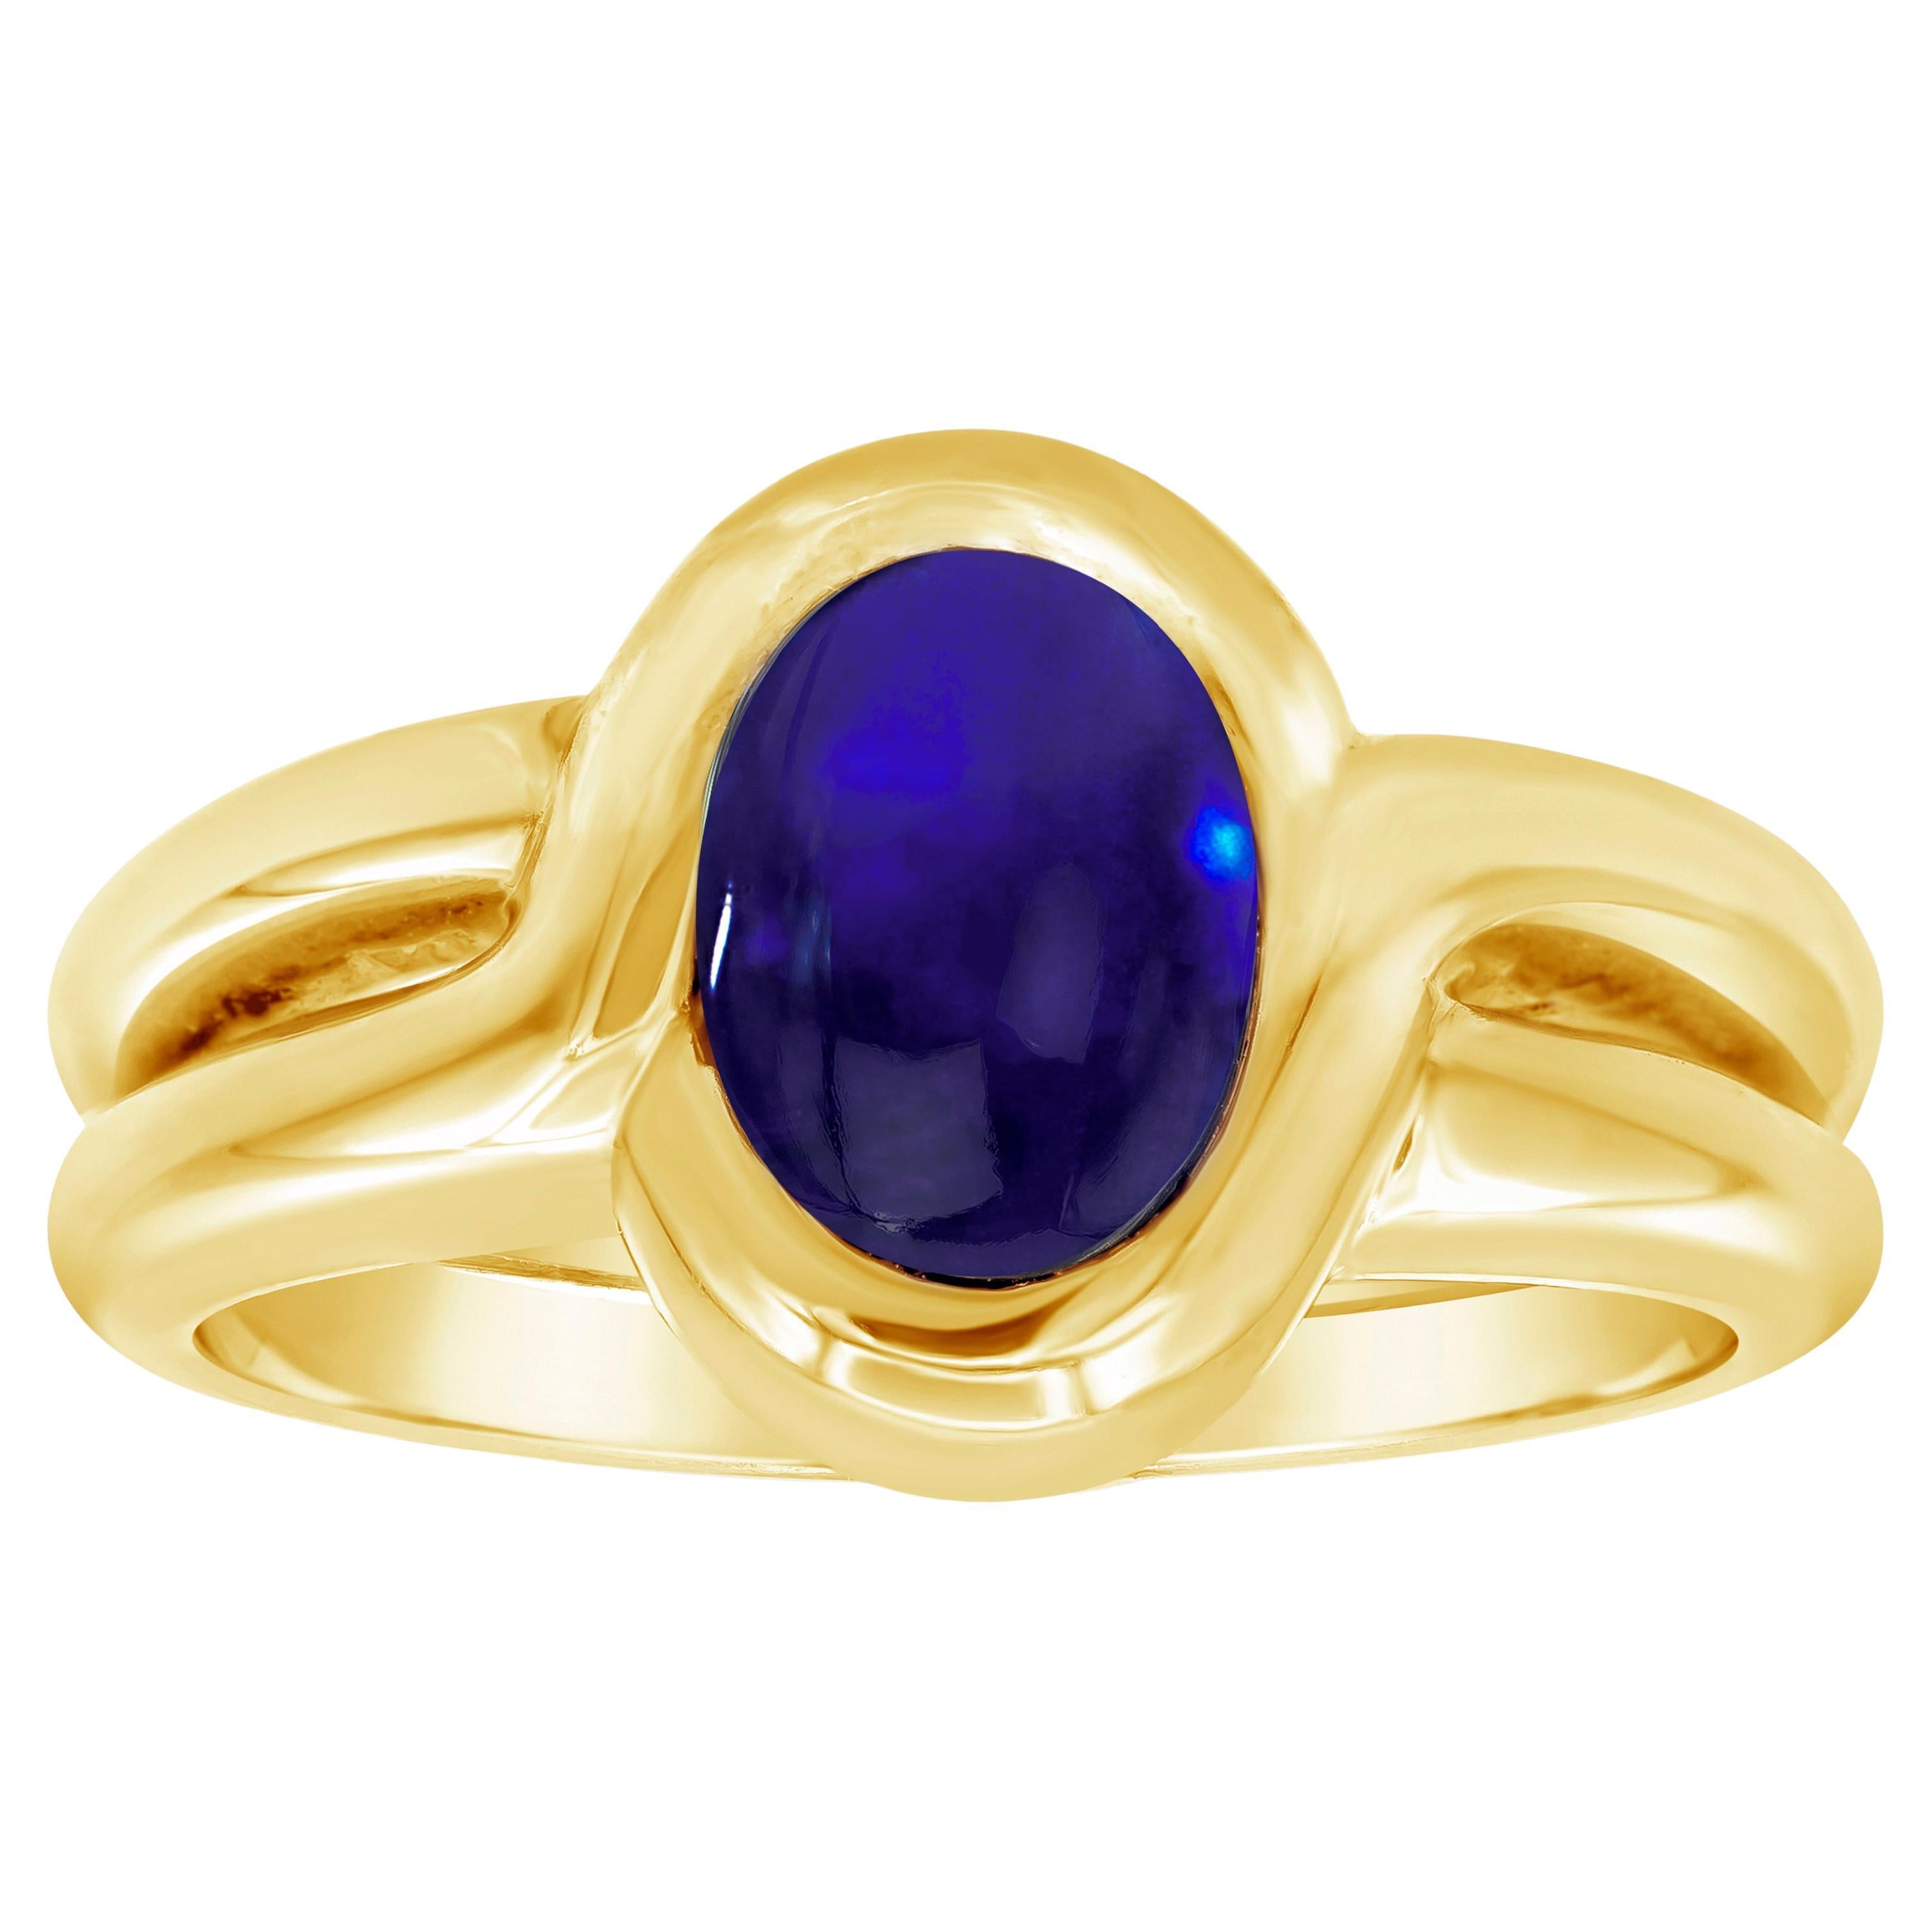 2.50 Carats Oval Cut Cabochon Sapphire Yellow Gold Double Shank Fashion Ring  For Sale